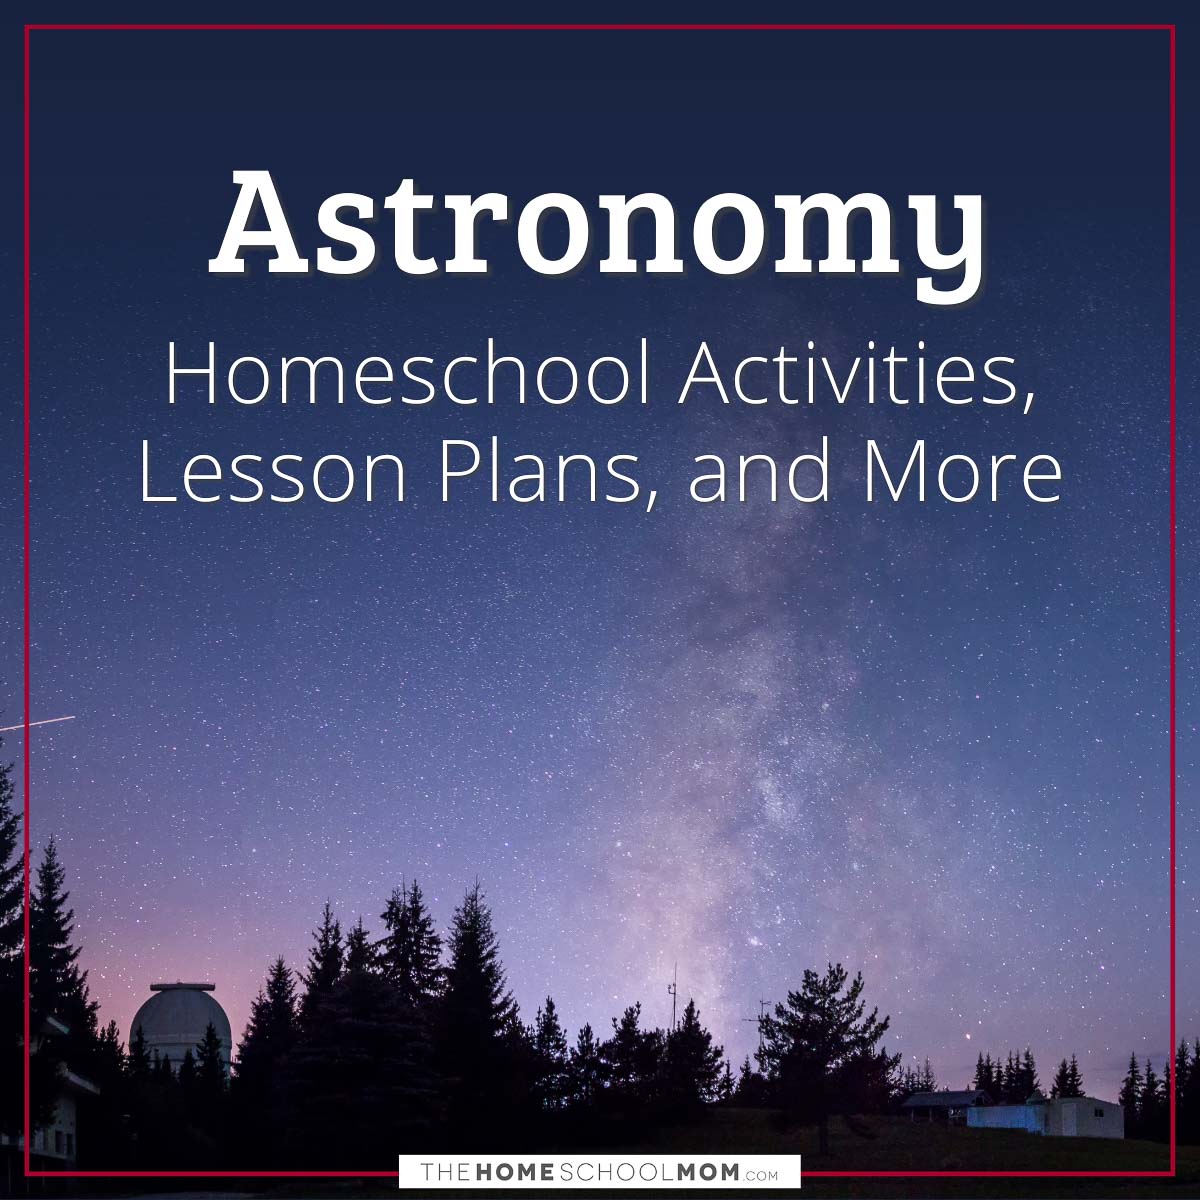 Astronomy Homeschool Activities, Lesson Plans, and More.